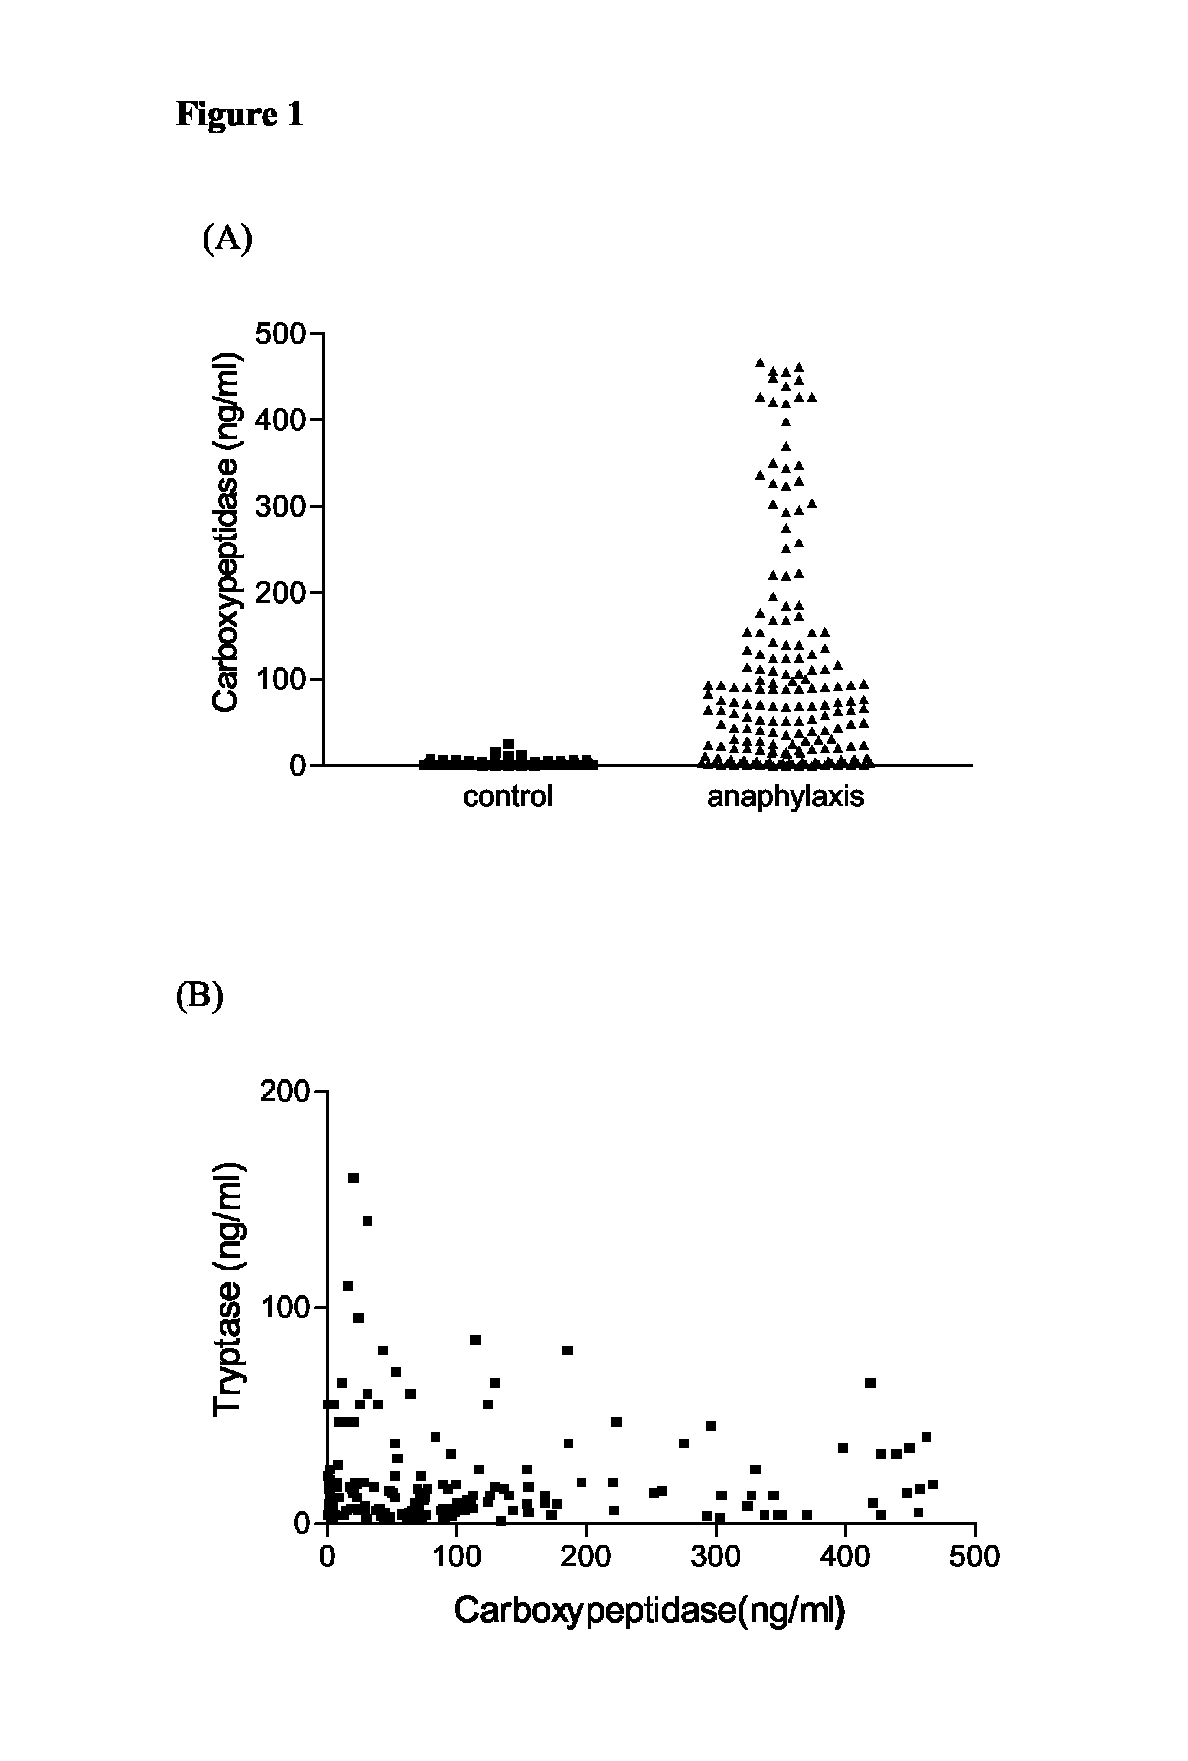 Mast cell carboxypeptidase as a marker for anaphylaxis and mastocytosis